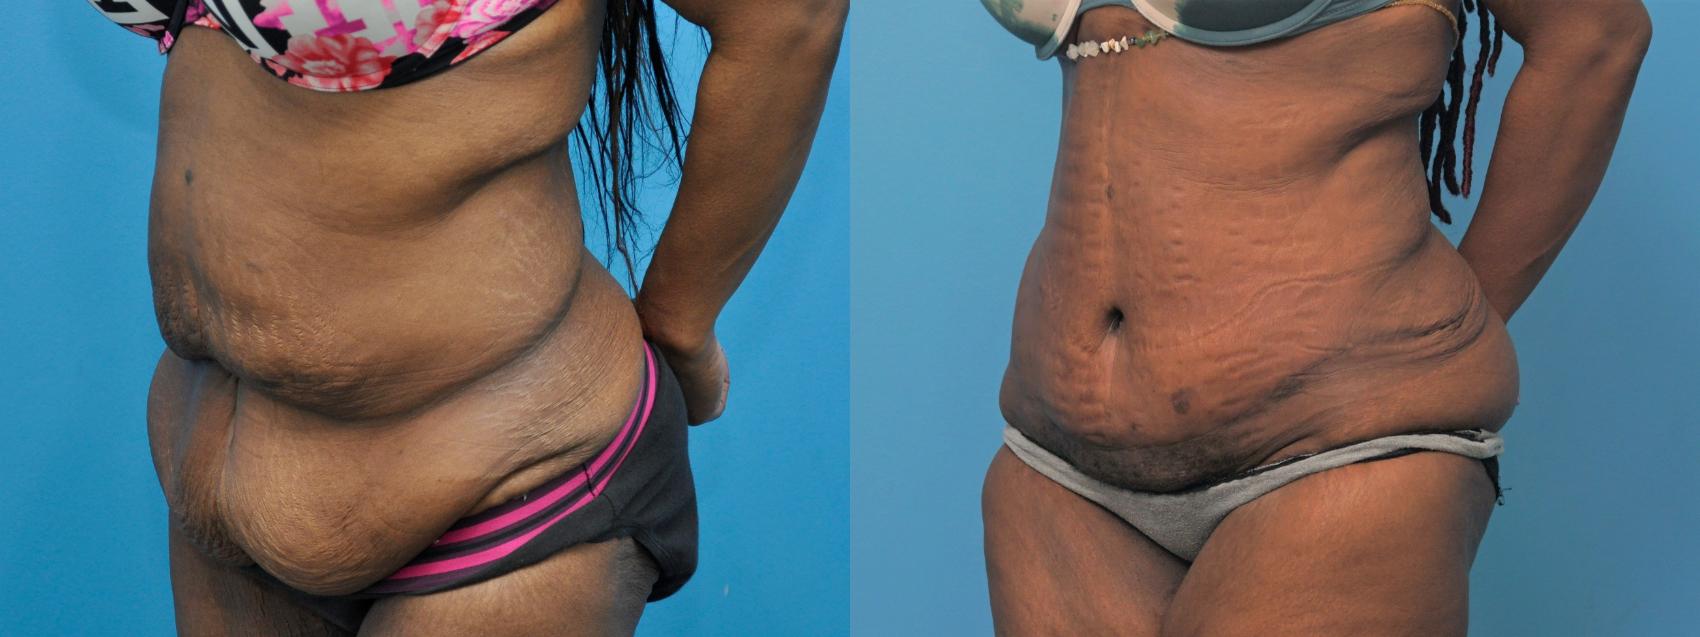 Tummy Tuck Recovery: What To Expect – Mark Sisco M.D.